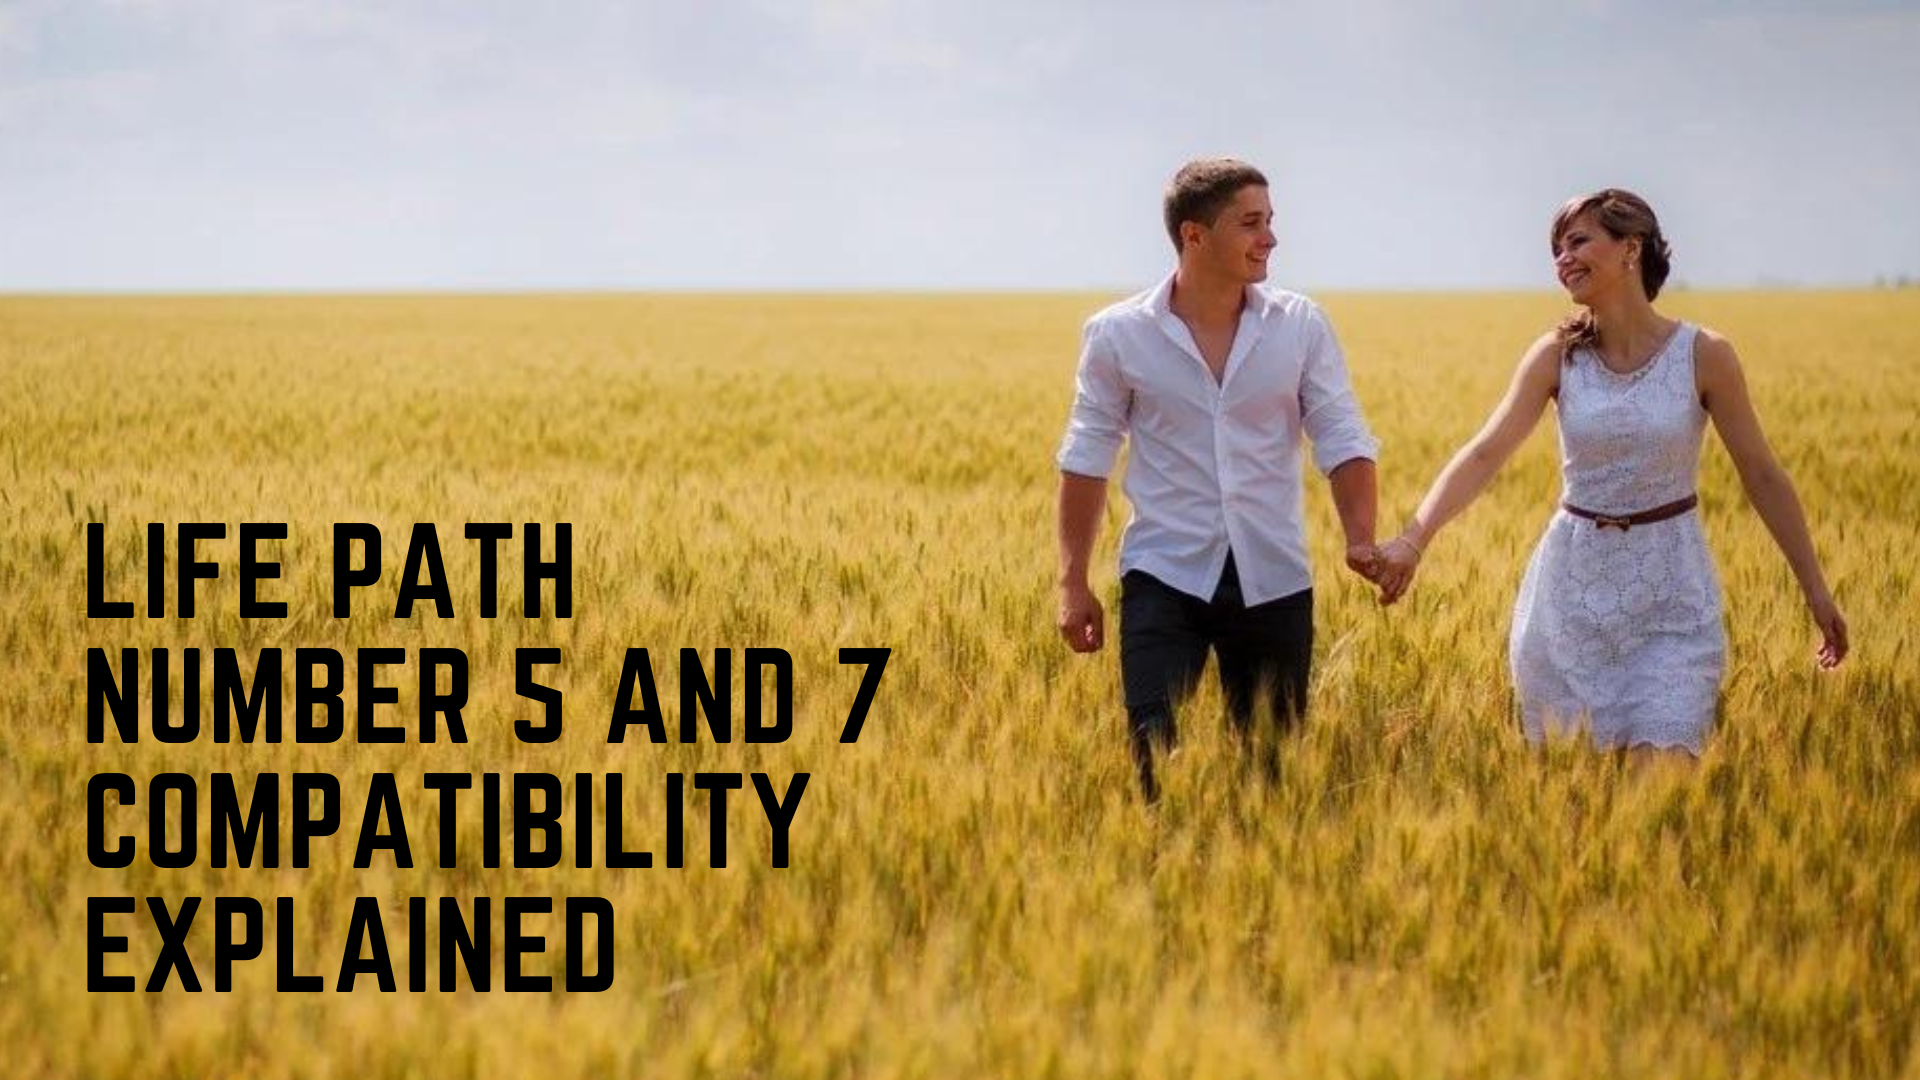 Happy couple holding hands while on the field with words Life Path Number 5 And 7 Compatibility Explained